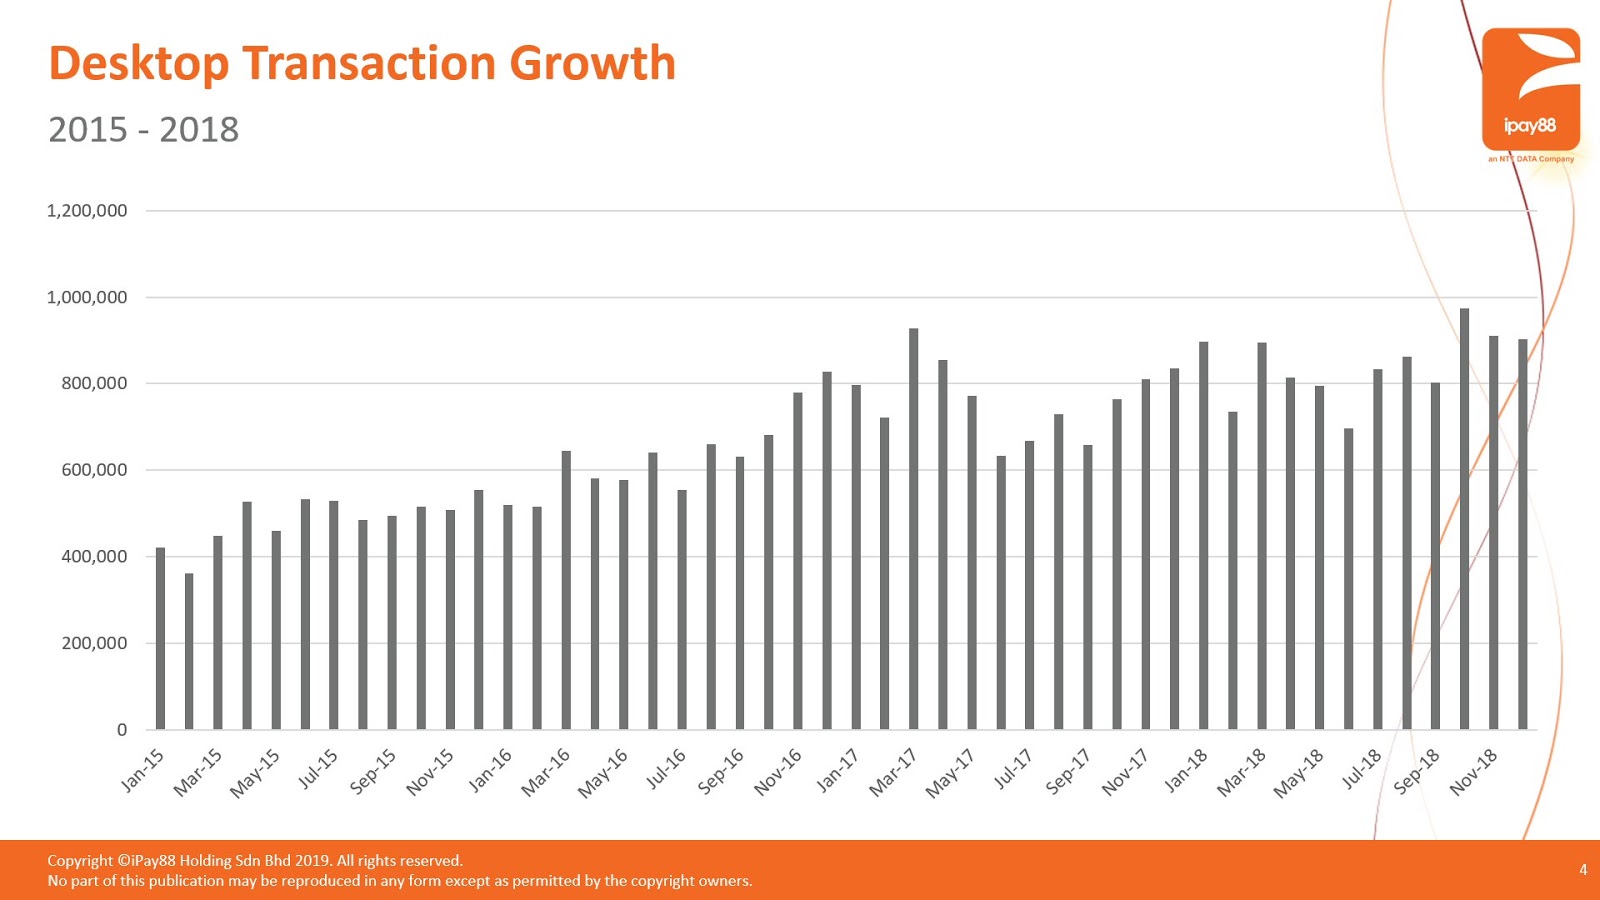 iPay88: Desktop Transaction Growth from 2015 to 2018